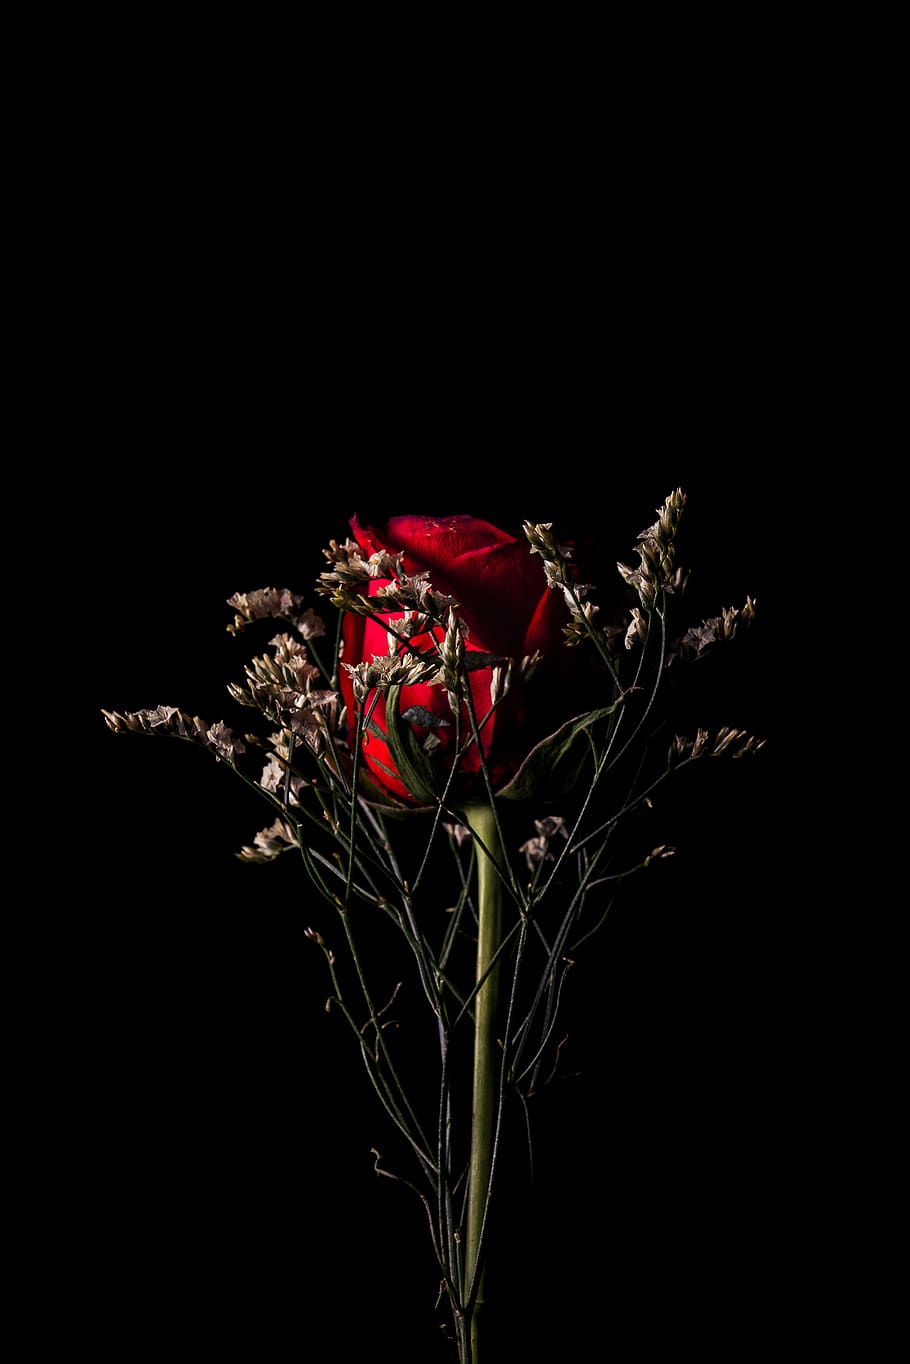 HD wallpaper: red rose behind white flowers in black background, plant,  flowering plant | Wallpaper Flare